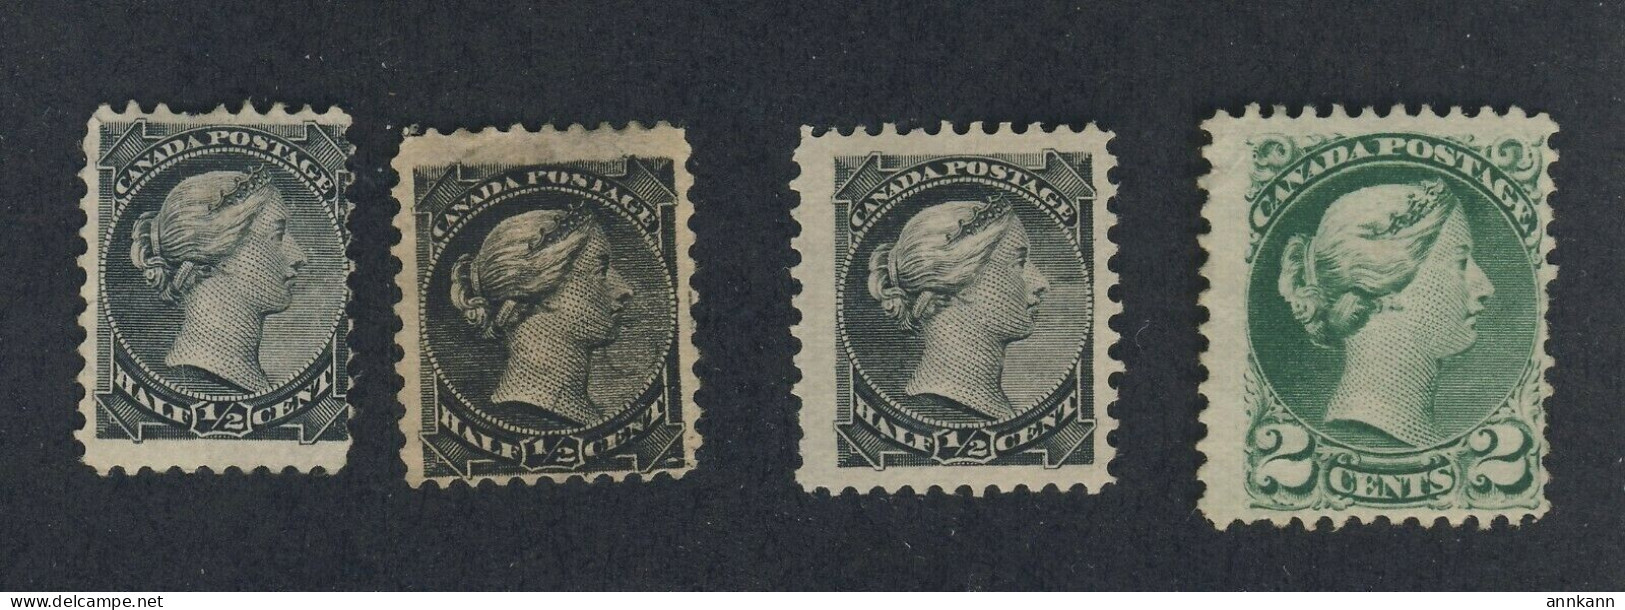 4x Canada Small Queen MNG Stamps 3x #34-1/2c F F/VF VF #36-2c Fine GV = $100.00 - Ongebruikt